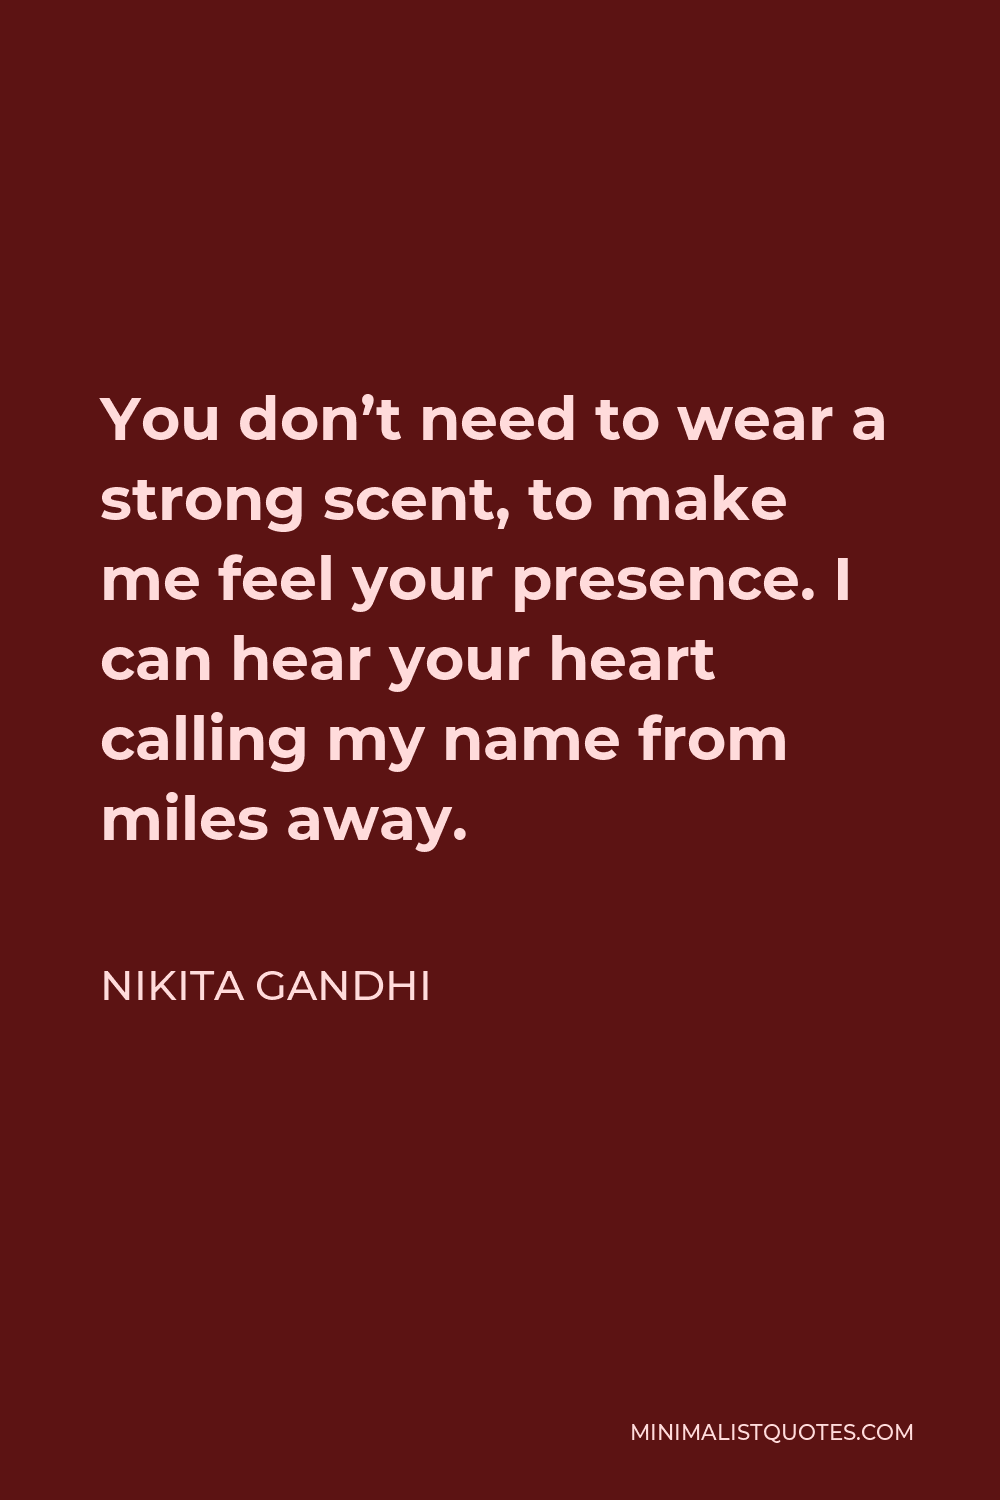 Nikita Gandhi Quote - You don’t need to wear a strong scent, to make me feel your presence. I can hear your heart calling my name from miles away.